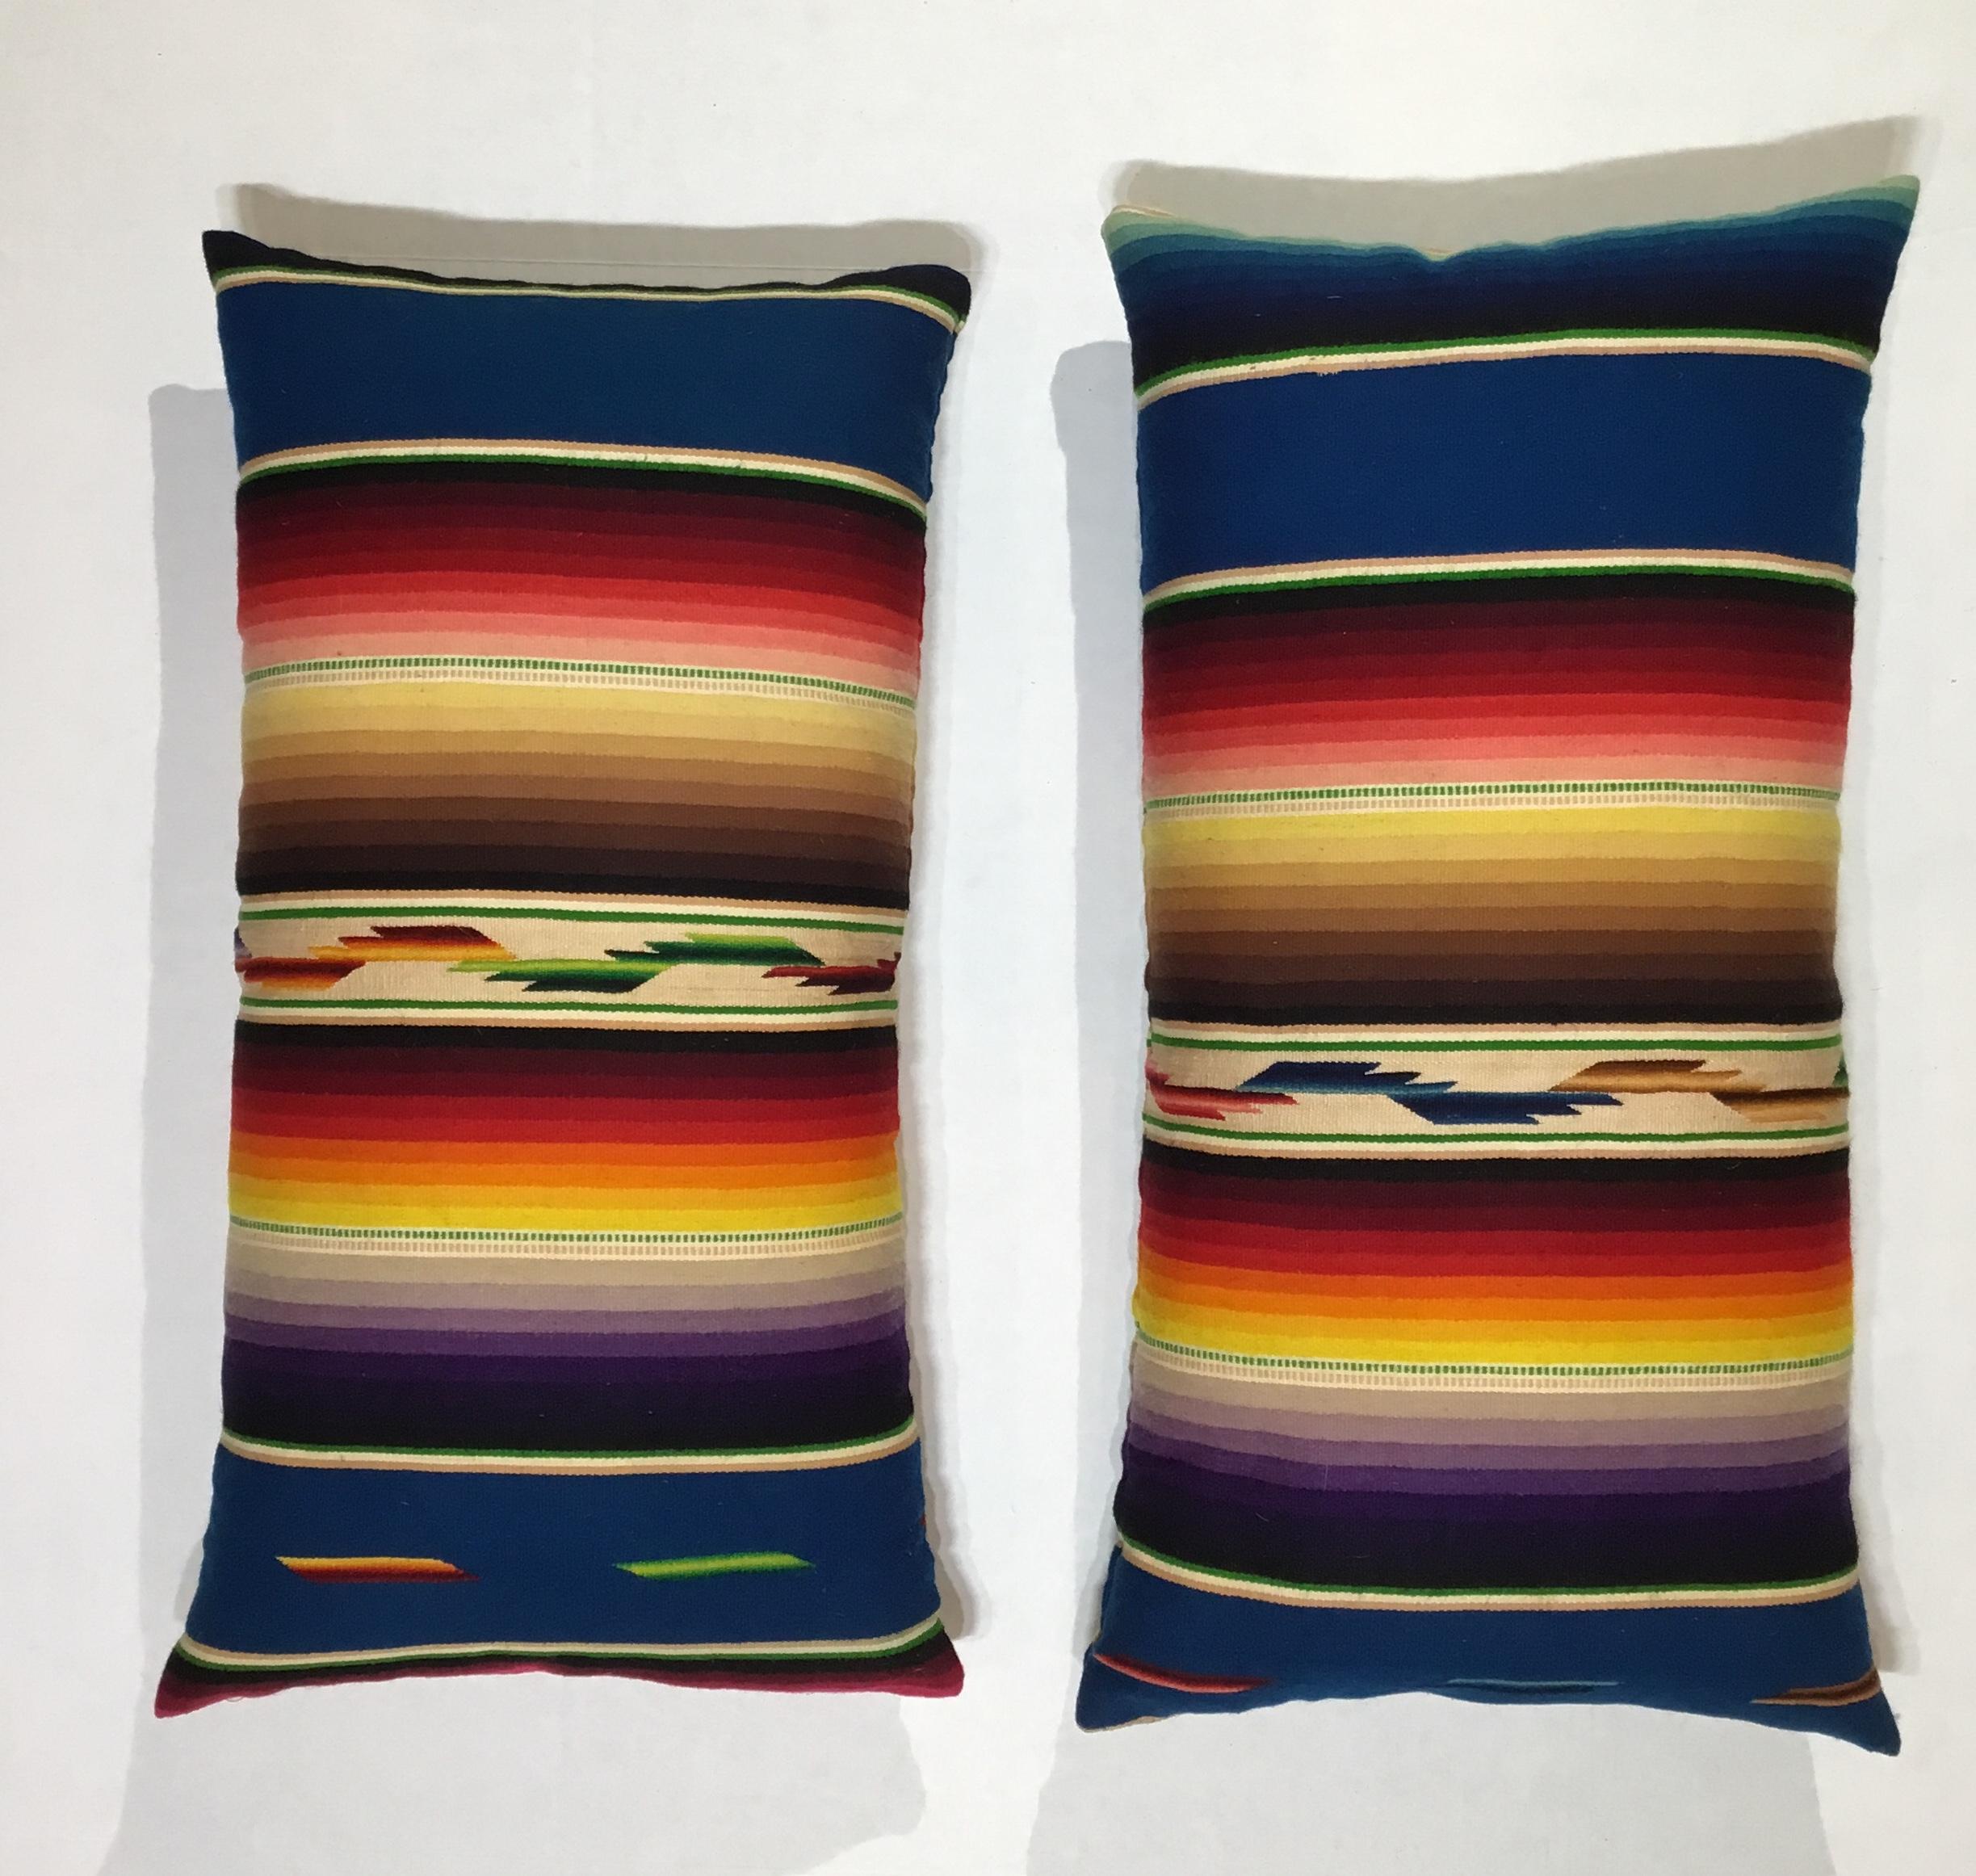 Beautiful pair of pillows made of finely handwoven multi-color vintage Saltillo Mexican blanket.
Originally this price used as wall tapestry and we decided to make pillows from it .the pillows are made with the woven textile back and front ,with